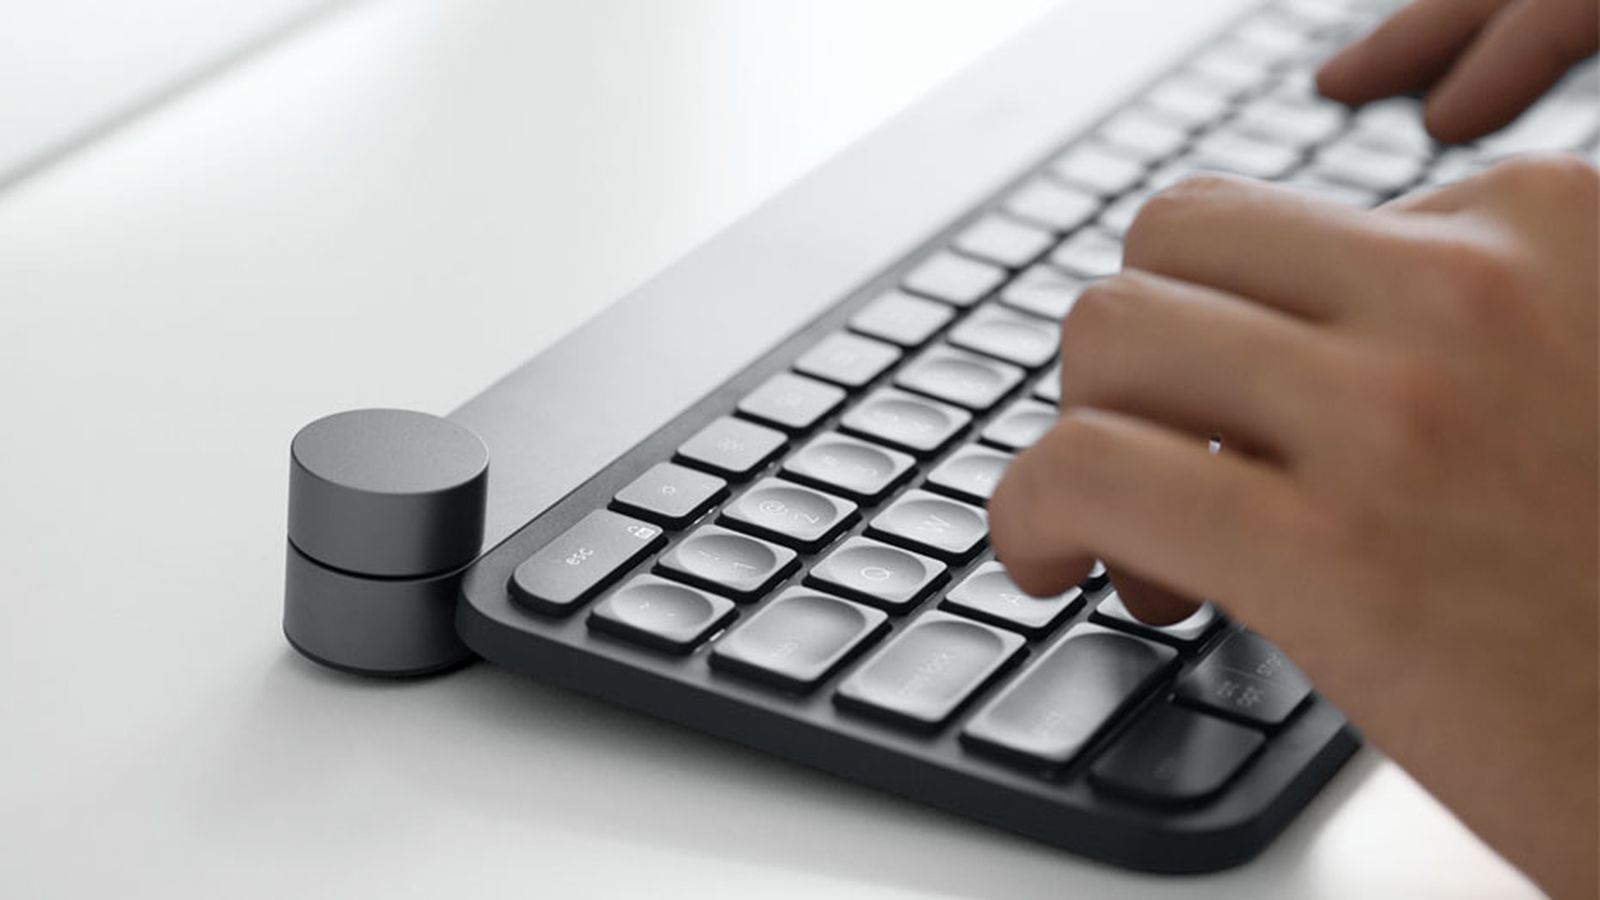 Review: Logitech's CRAFT Wireless Keyboard is Pricey, but the Input Dial Is a Addition - MacRumors